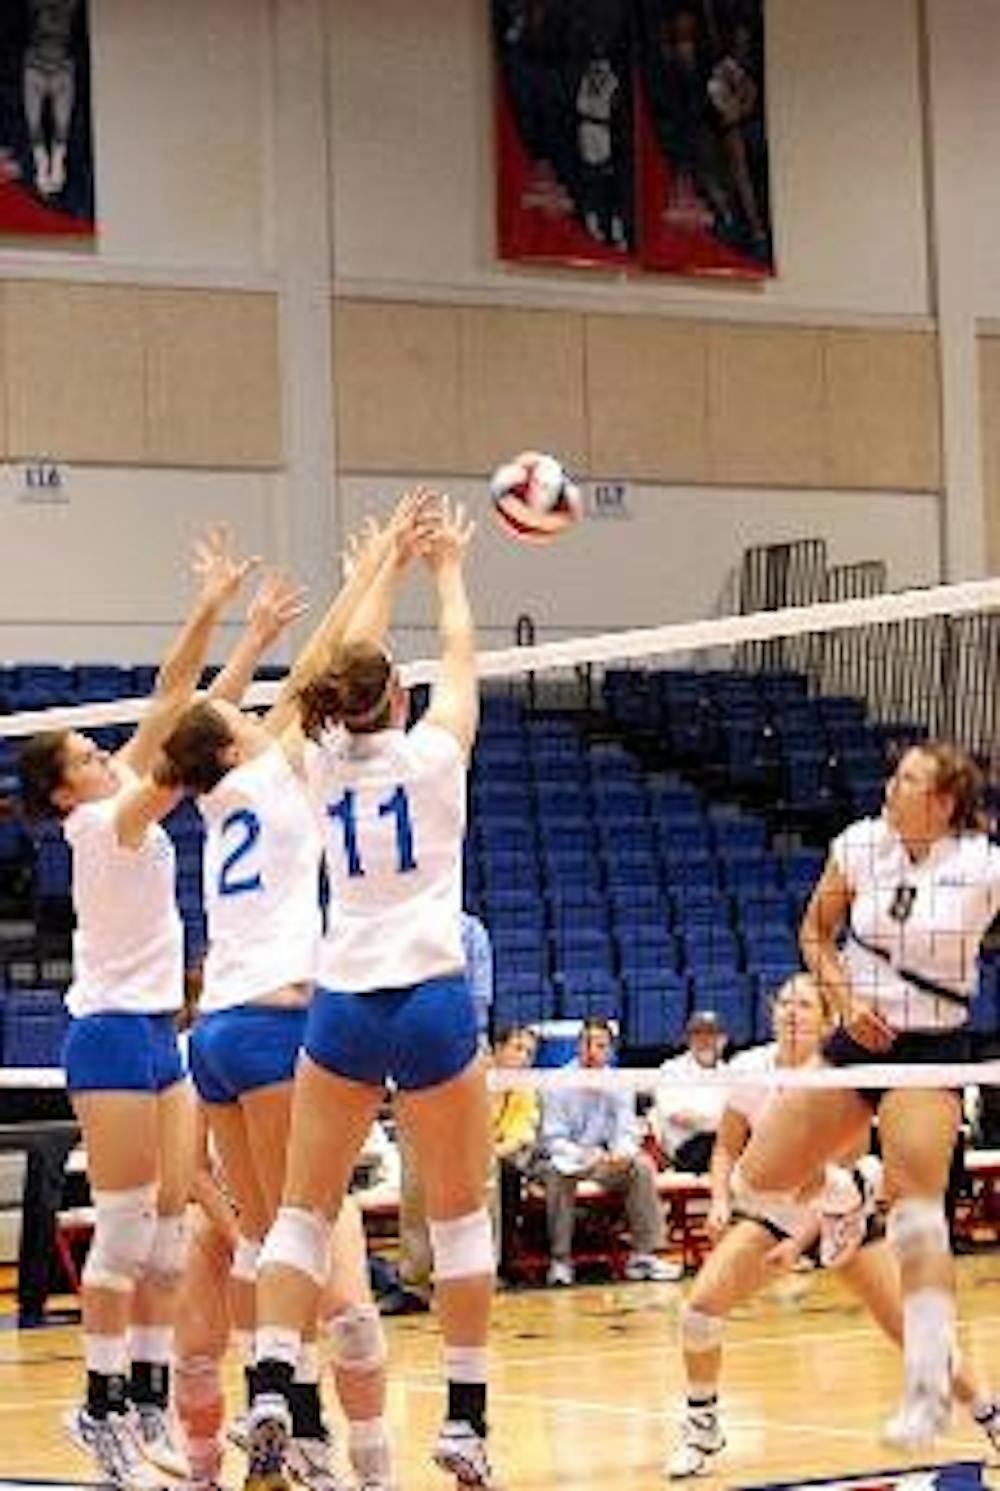 TRIPLE THREAT - Rubena Sukaj, Katarina Cinkova and Christina Nash (from left to right) all put up their arms  to block a shot in the Eagles' recent match against the U.S. Naval Academy.  AU won 3-2 on Saturday.